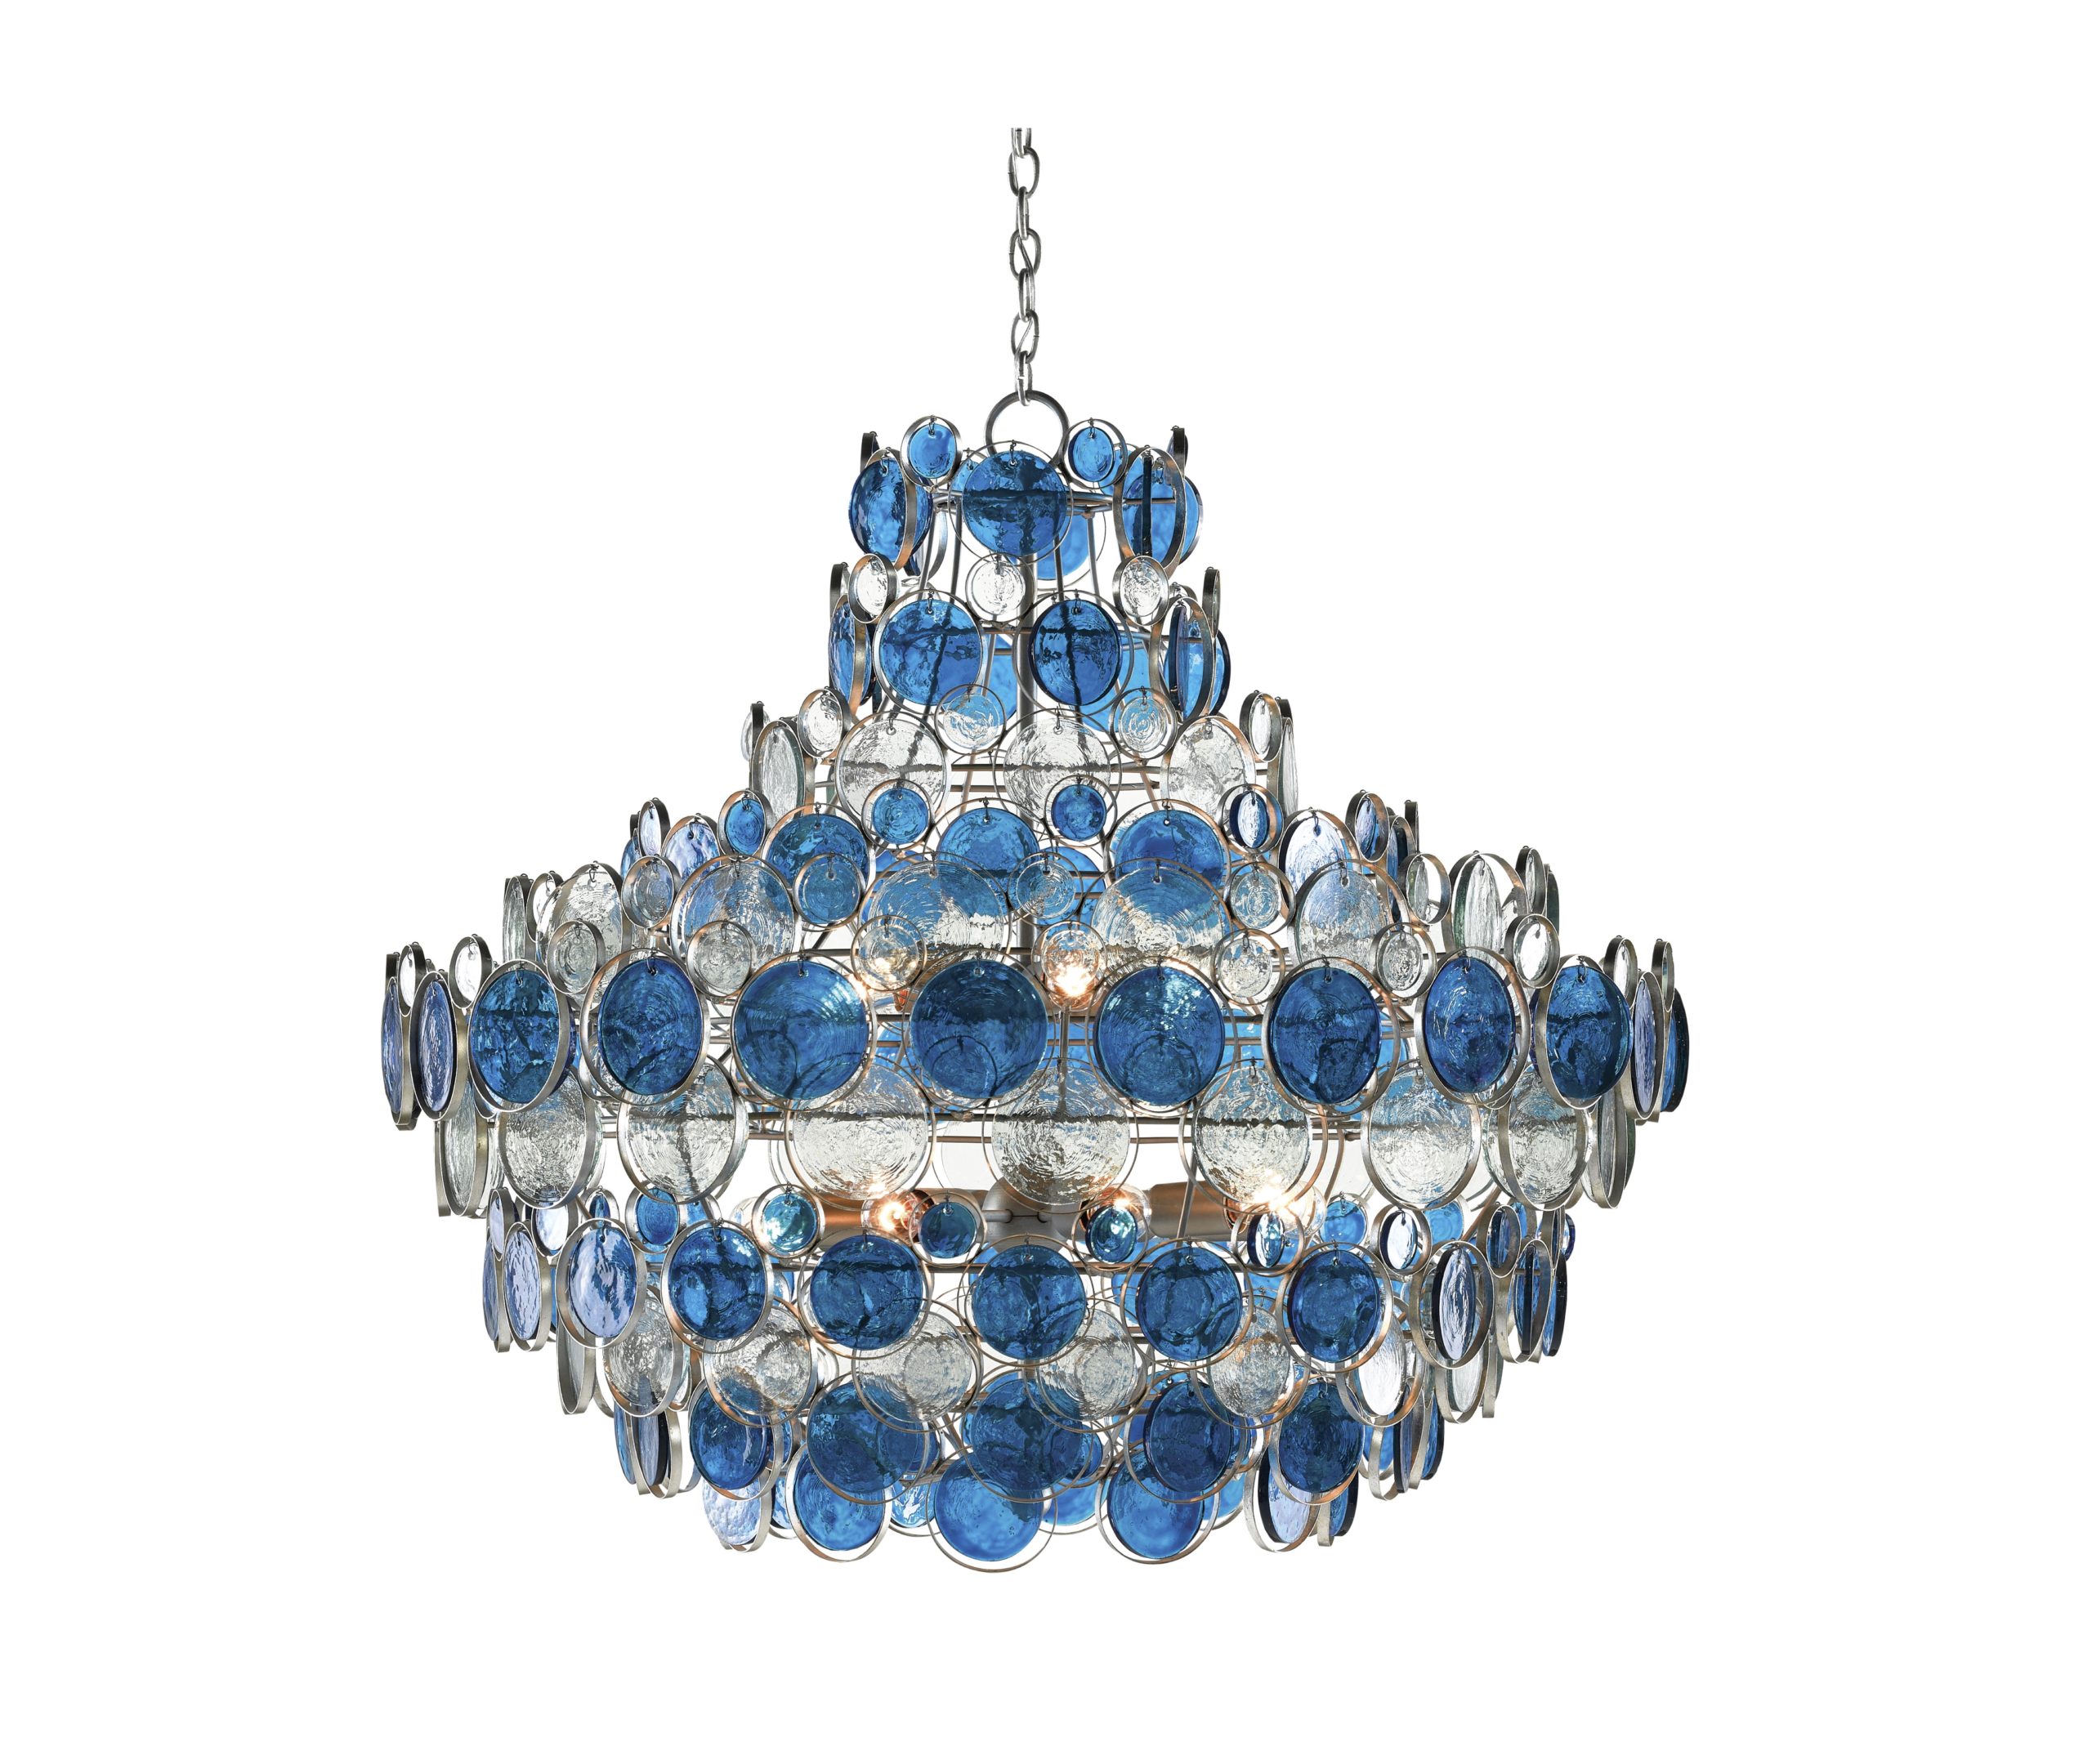 NYDC_WNWN_currey_and_co_products_galahad_blue_chandelier_9000-0723